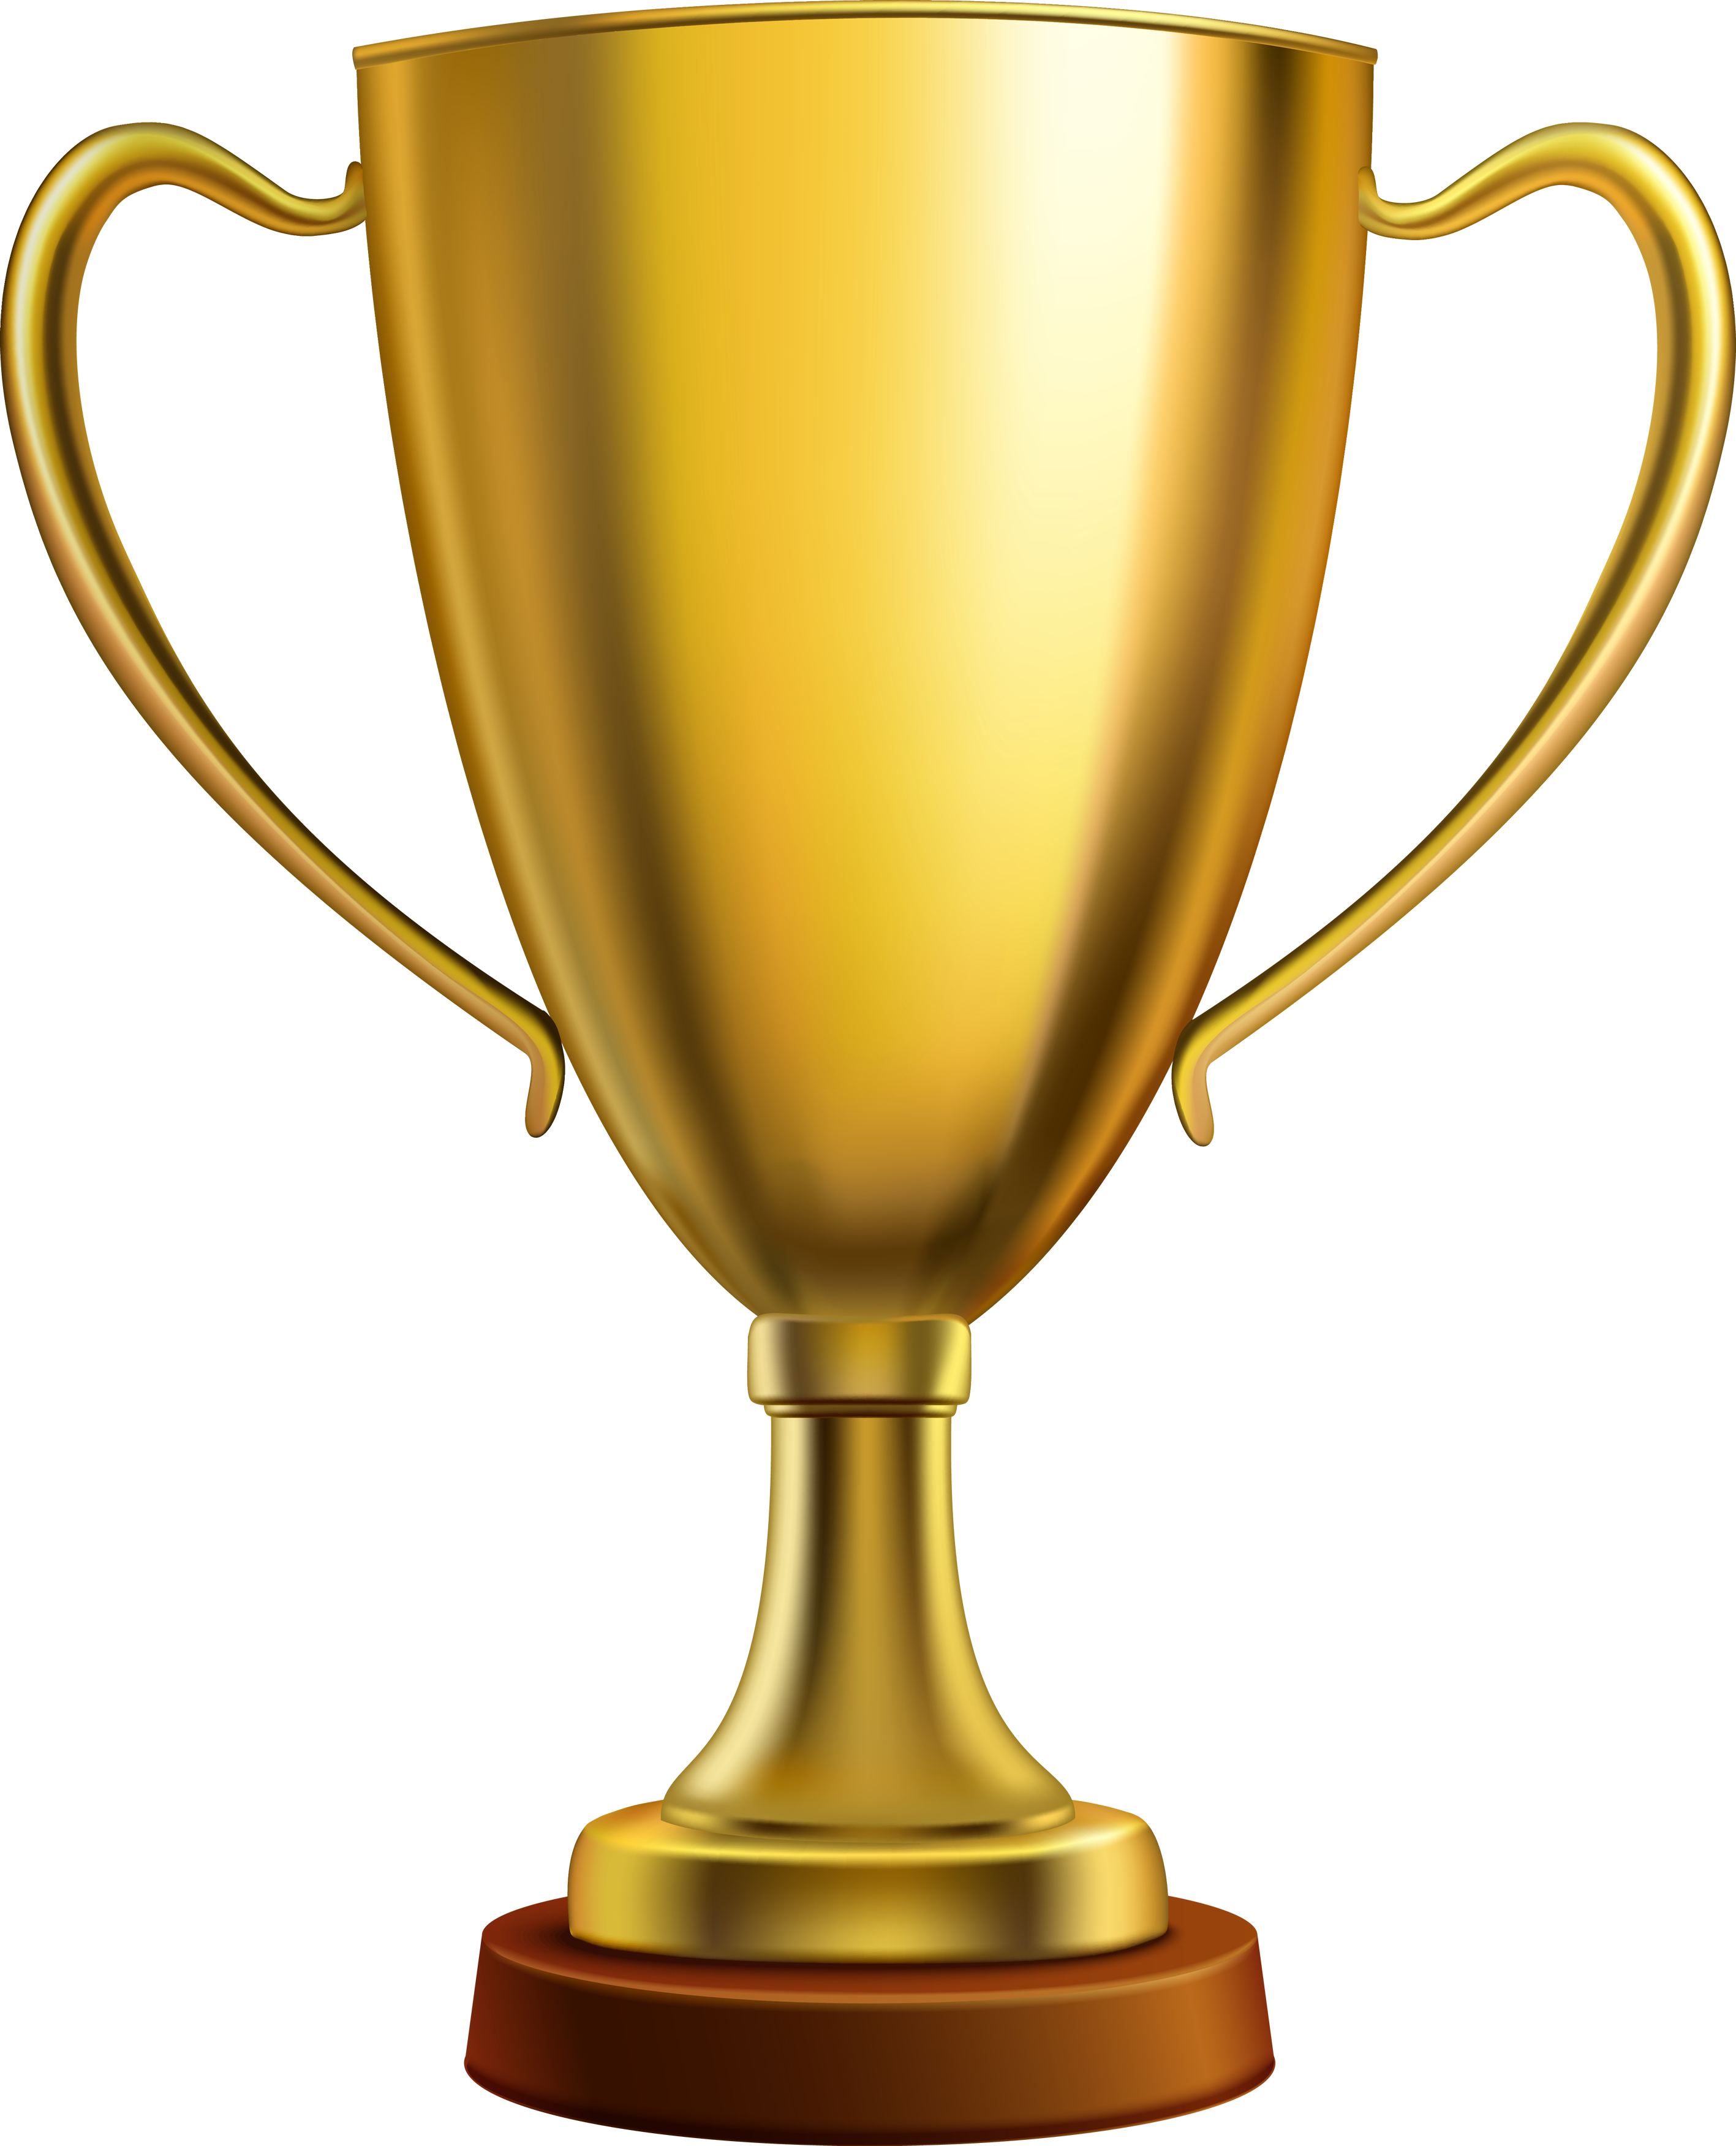 Trophy Golden Cup Free Photo PNG Clipart